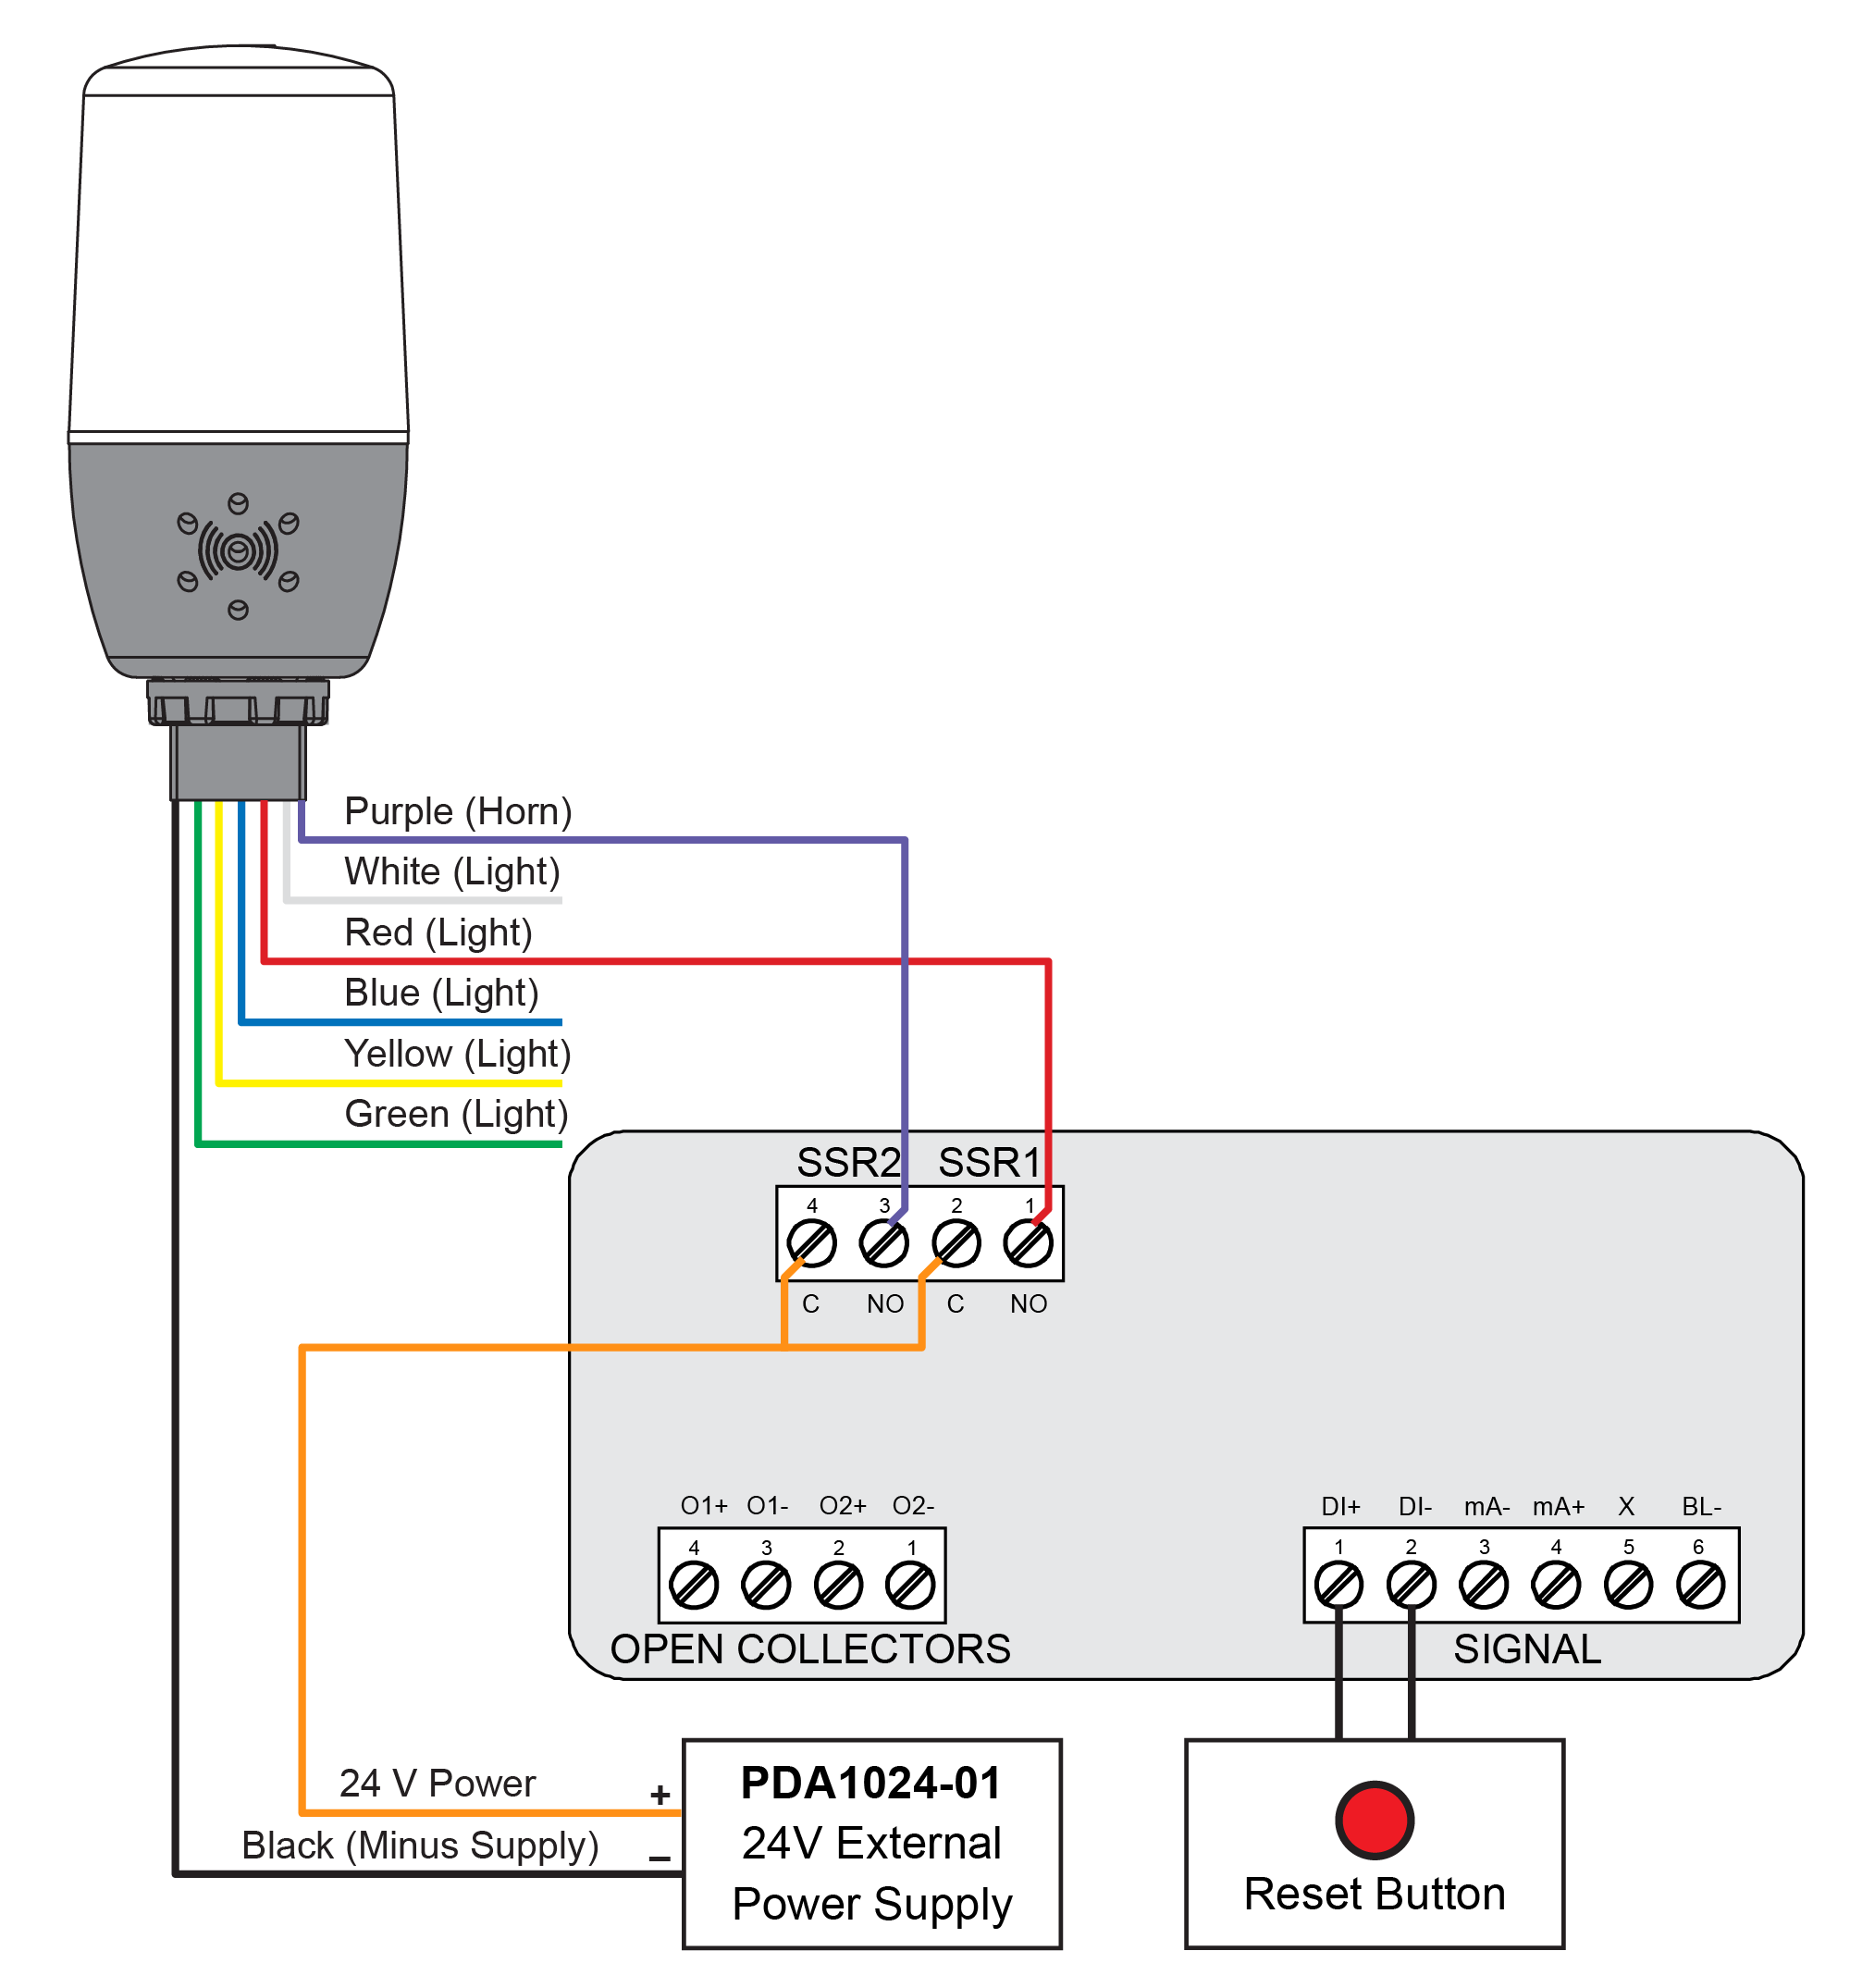 Wiring Connections for PDA-LH5C Models Using PDA1024-01 External Power Supply